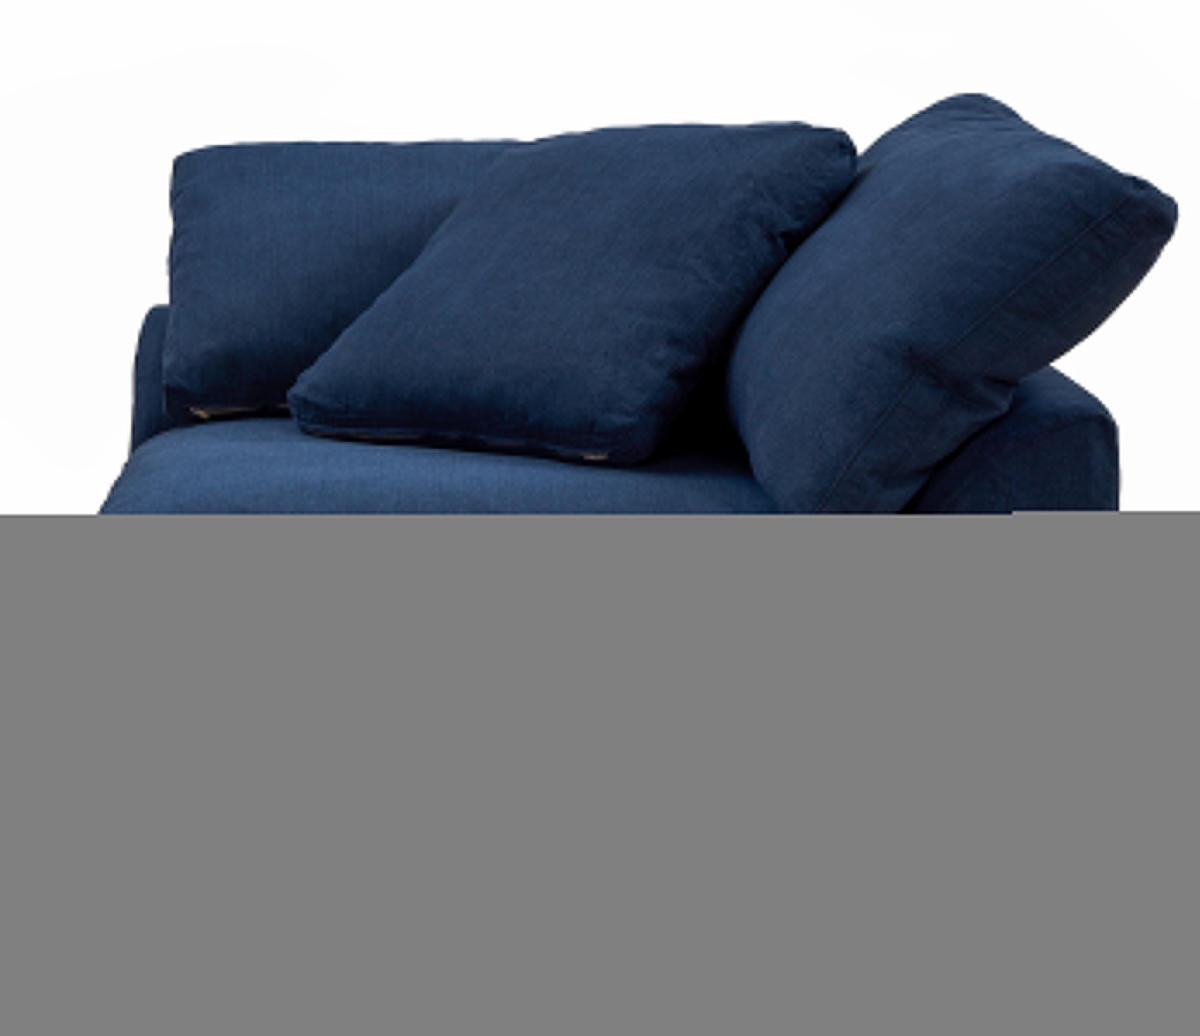 Su-1458-49-3c Cloud Puff Slipcovered Modular Sectional Small Large Shaped Performance Fabric Sofa, Navy Blue - 3 Piece